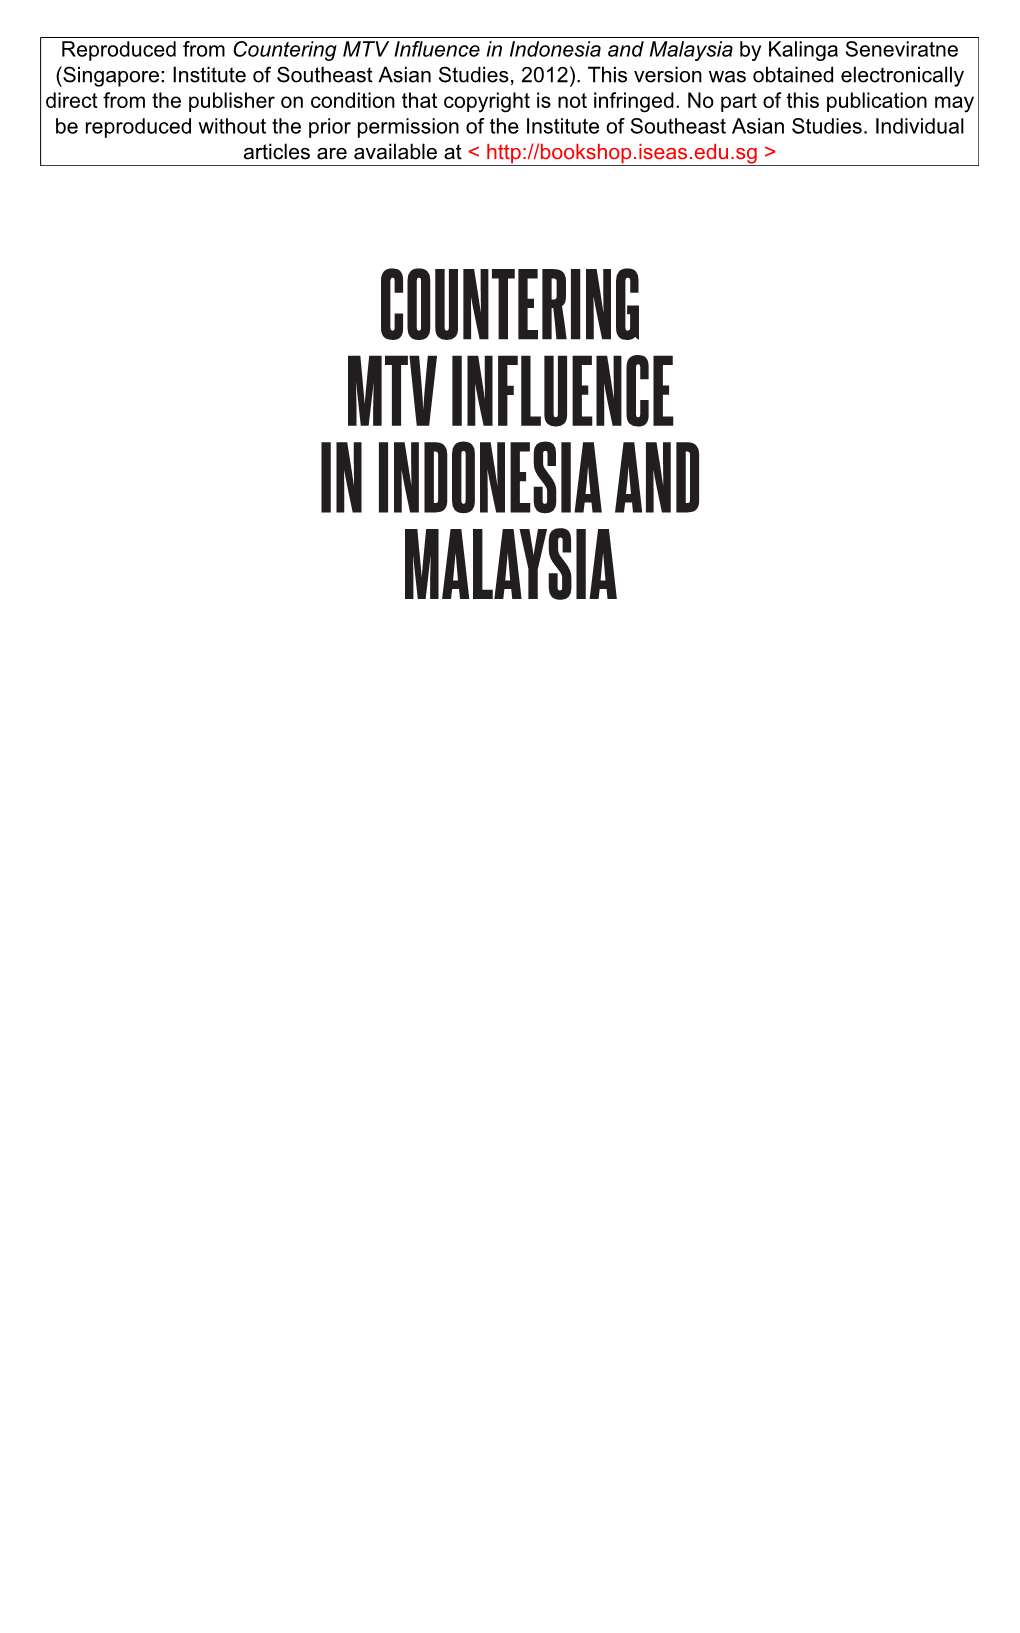 Countering MTV Influence in Indonesia and Malaysia